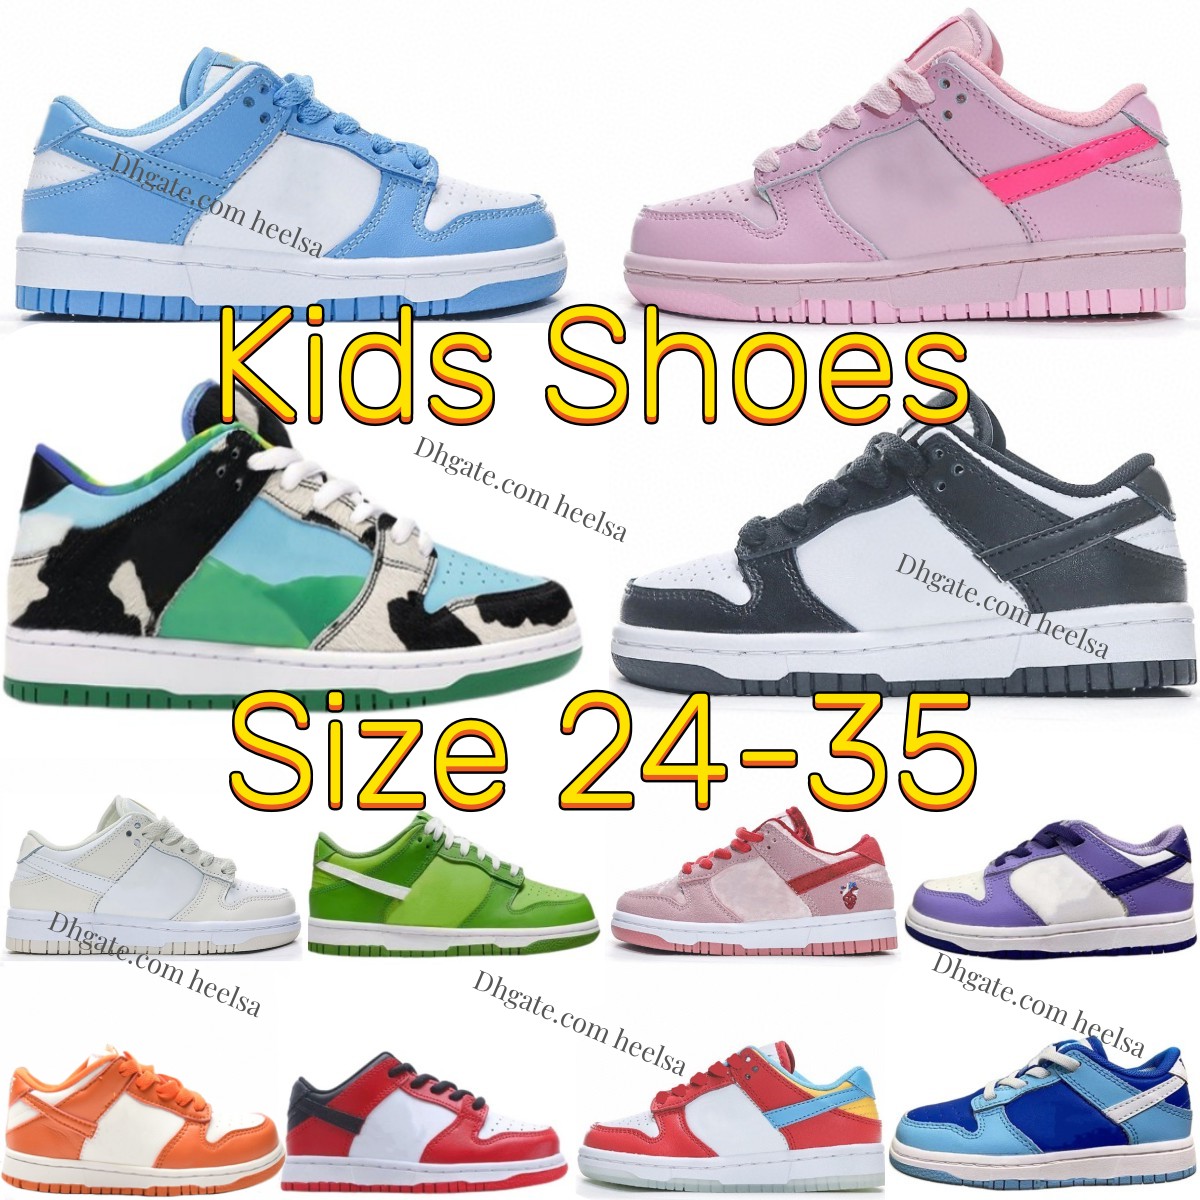 

Kids Shoes Dunks Sb Low Sneakers Children Youth Shoe Kid Boys Girls Sport Trainers Outdoor Athletic Toddlers Runner Sneaker White Black Panda Triple Pink Size 24-35, No box